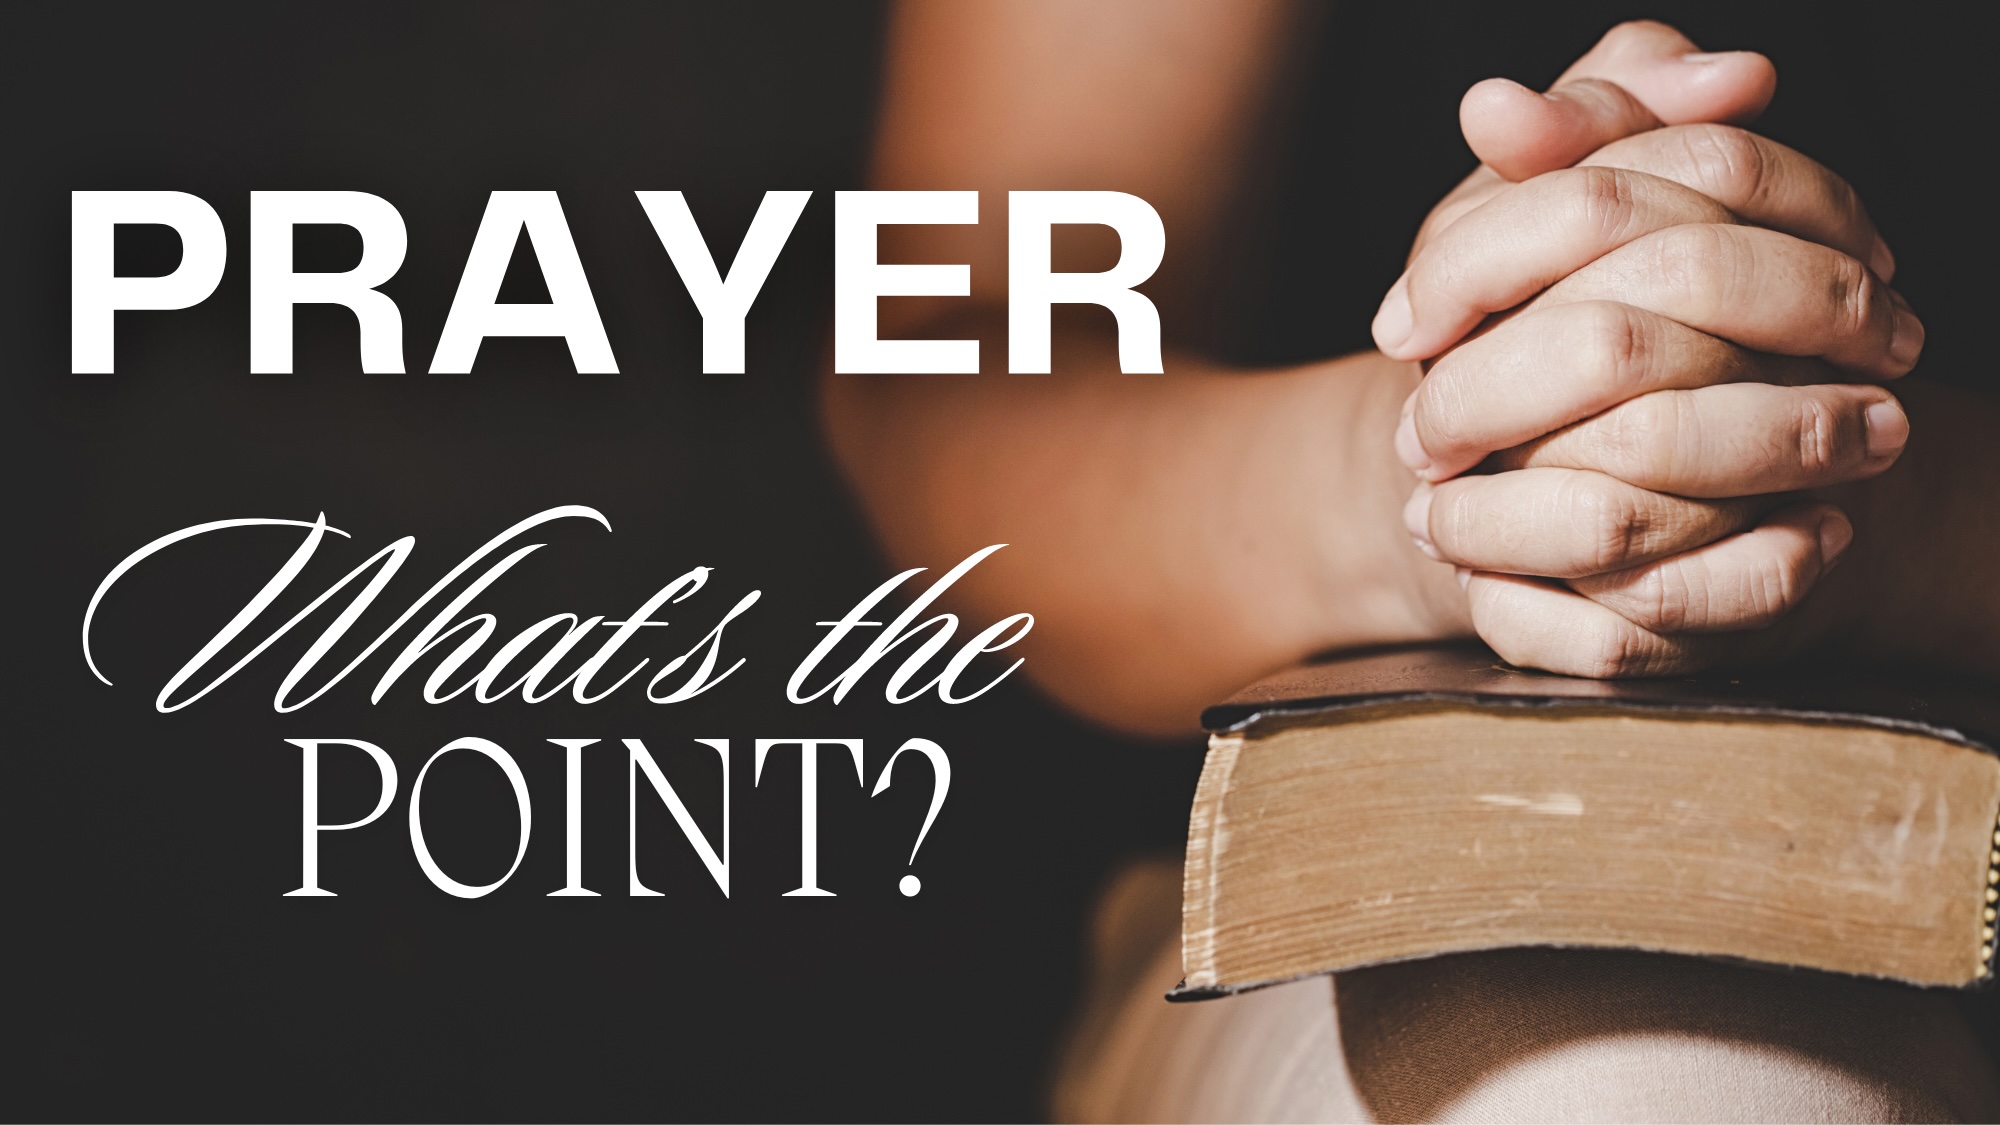 What's the point of prayer?